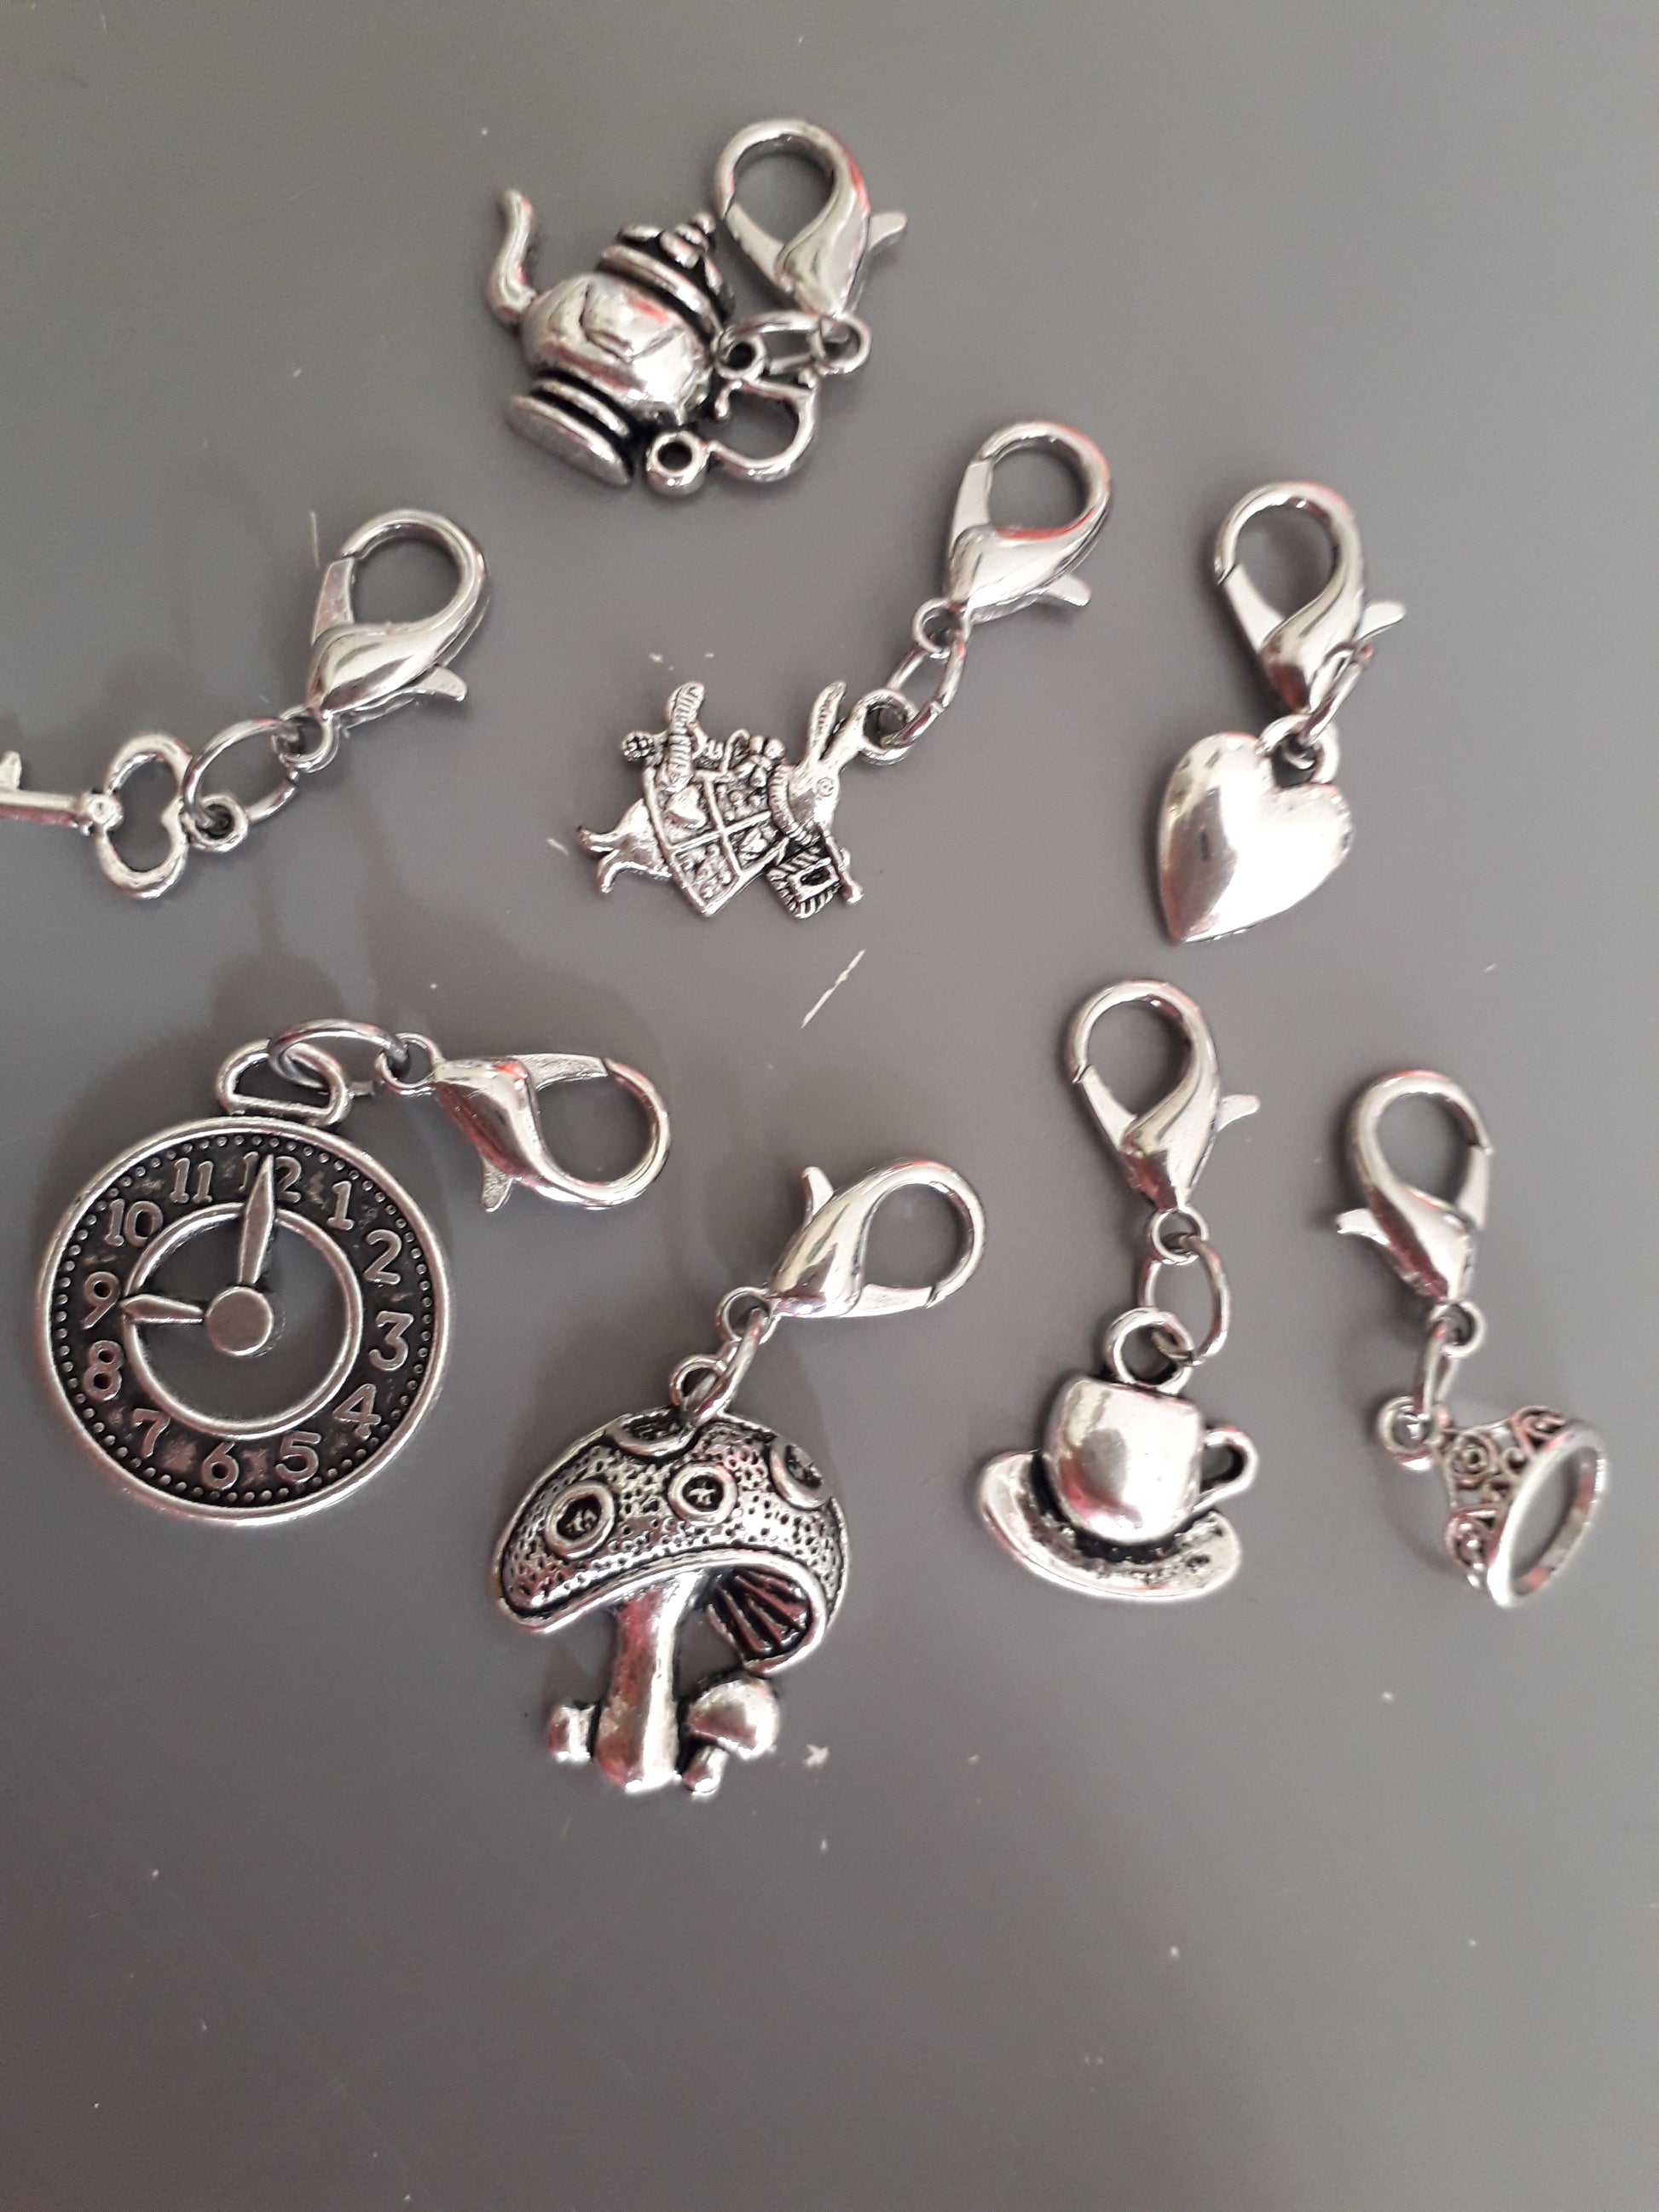 Alice in Wonderland Stitch Marker set. Lobster clasp or fixed ring. 